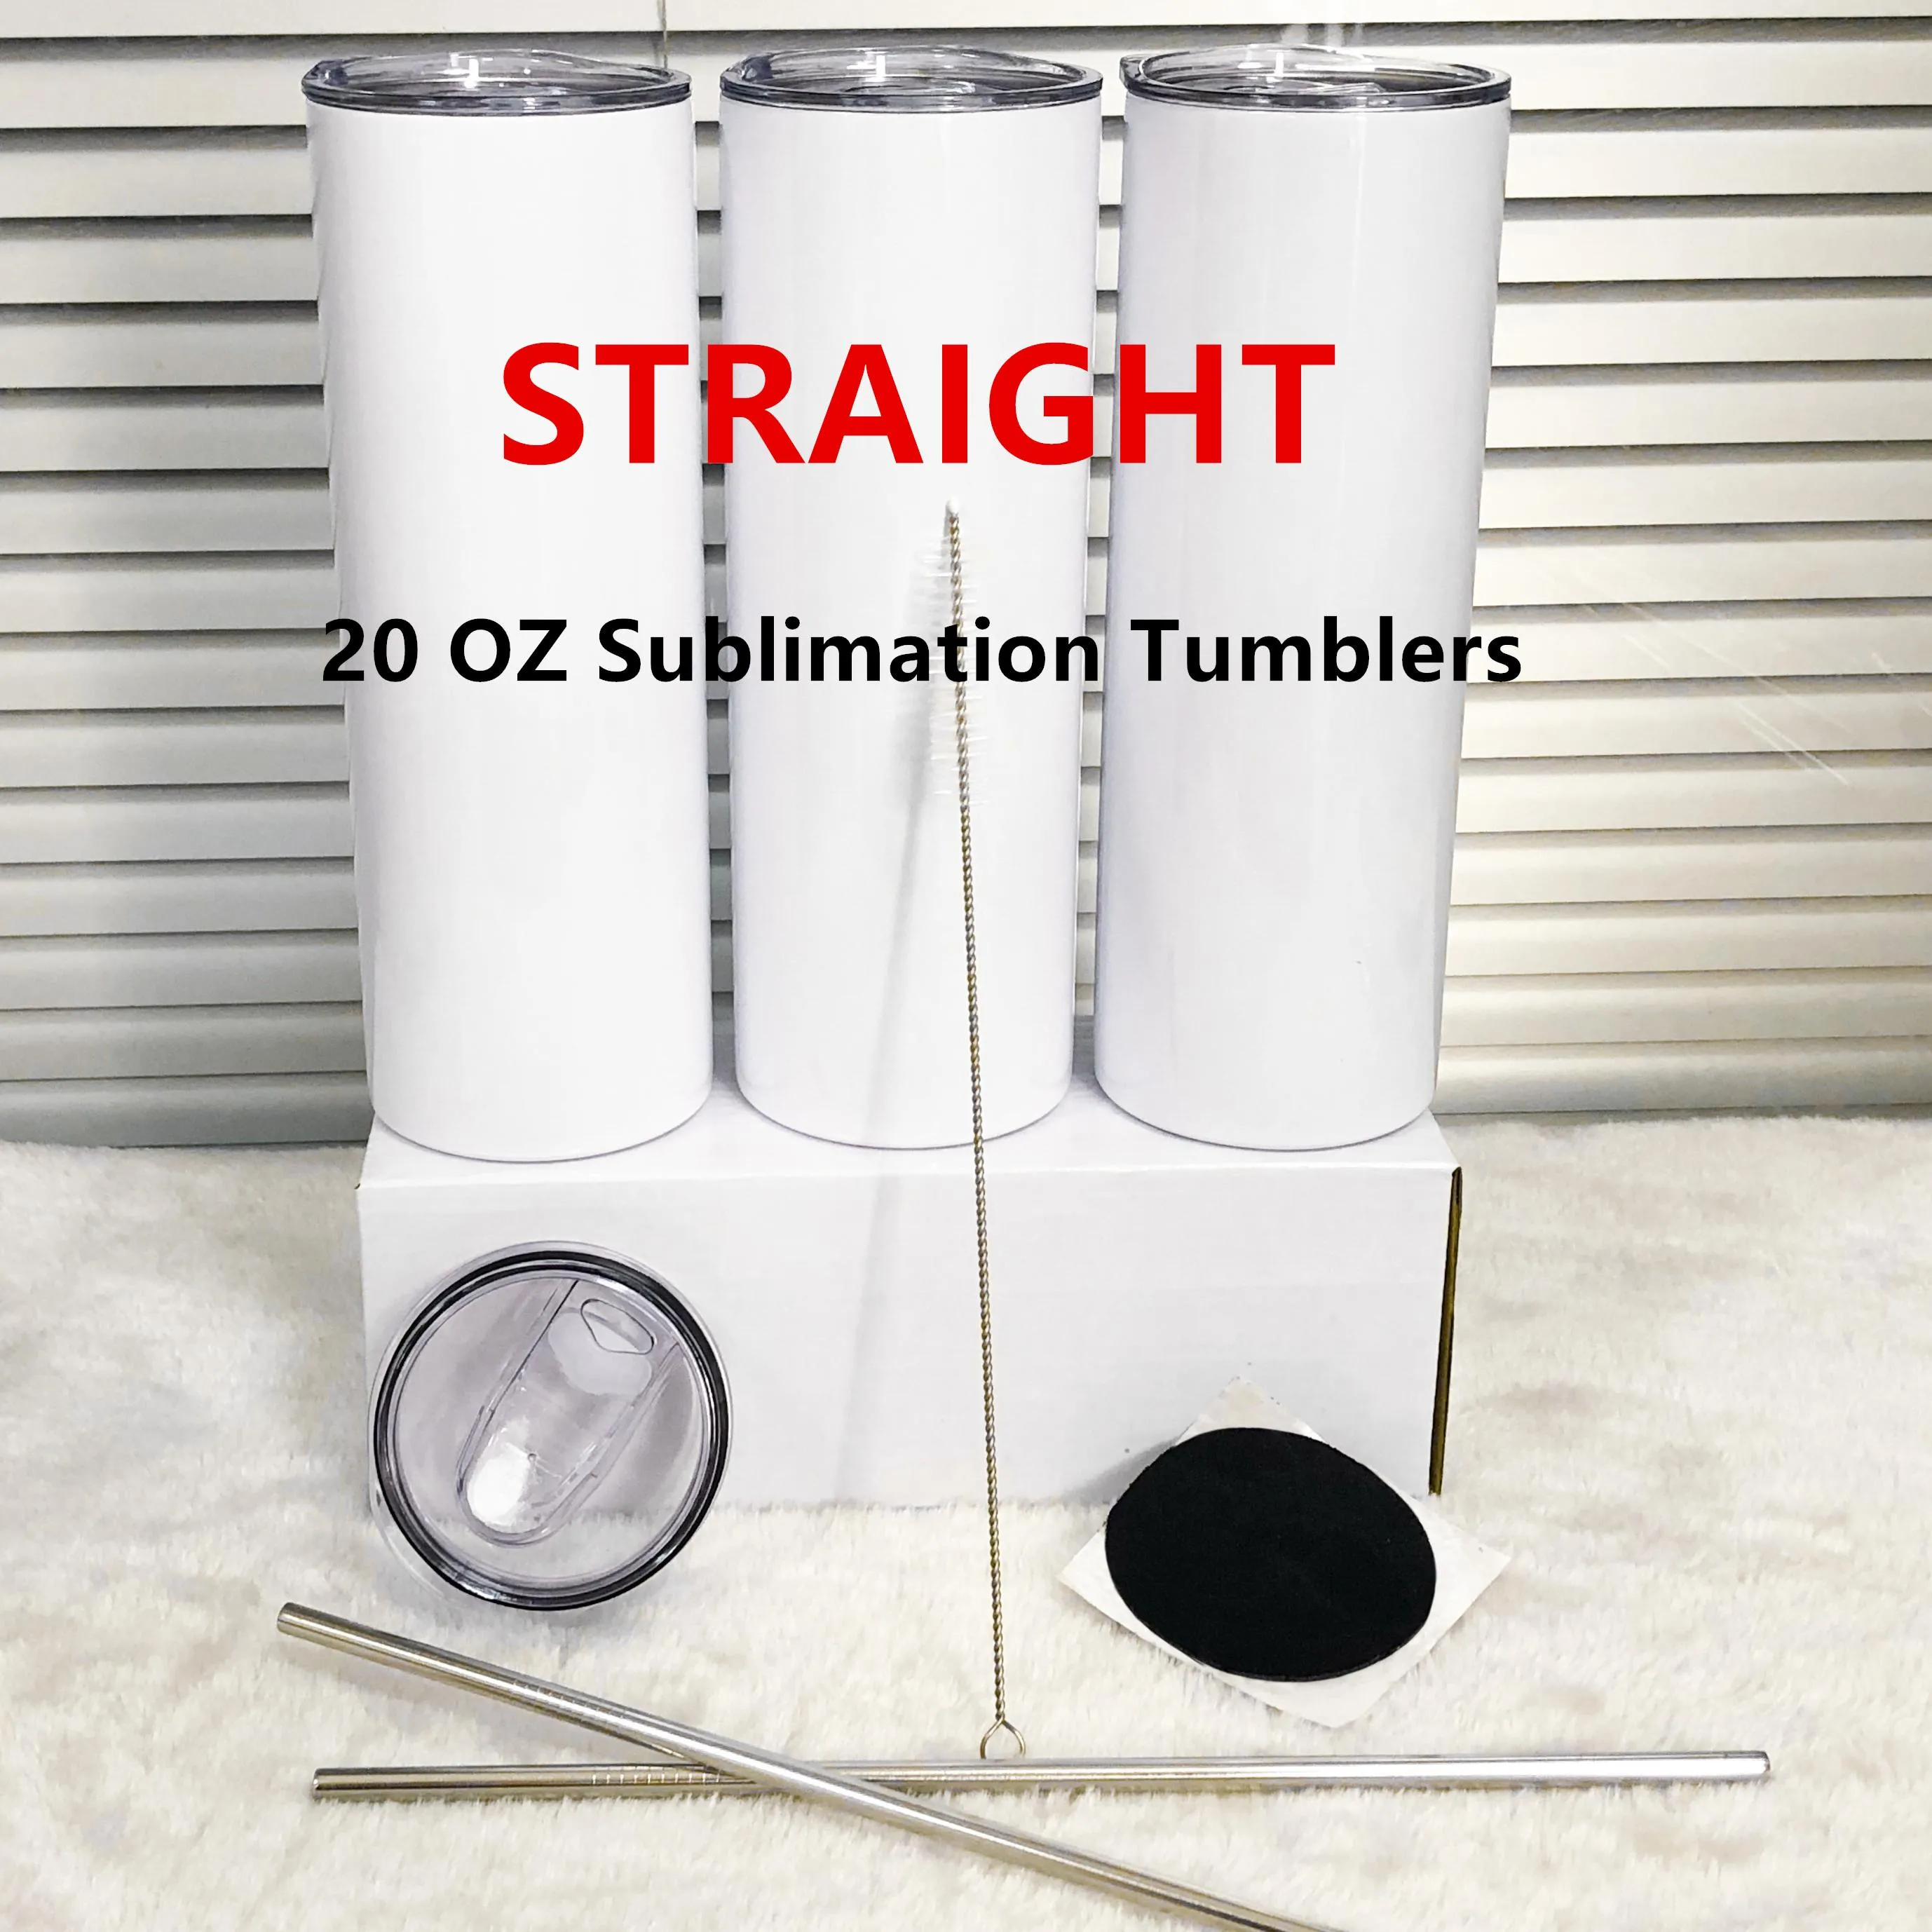 US Warehouse!!! 20oz Sublimartion Straight tumblers with Steel Straw Lid Stainless Steel tumbler Coffee Mug Sublimation Blanks Water Bottle 50cups/box